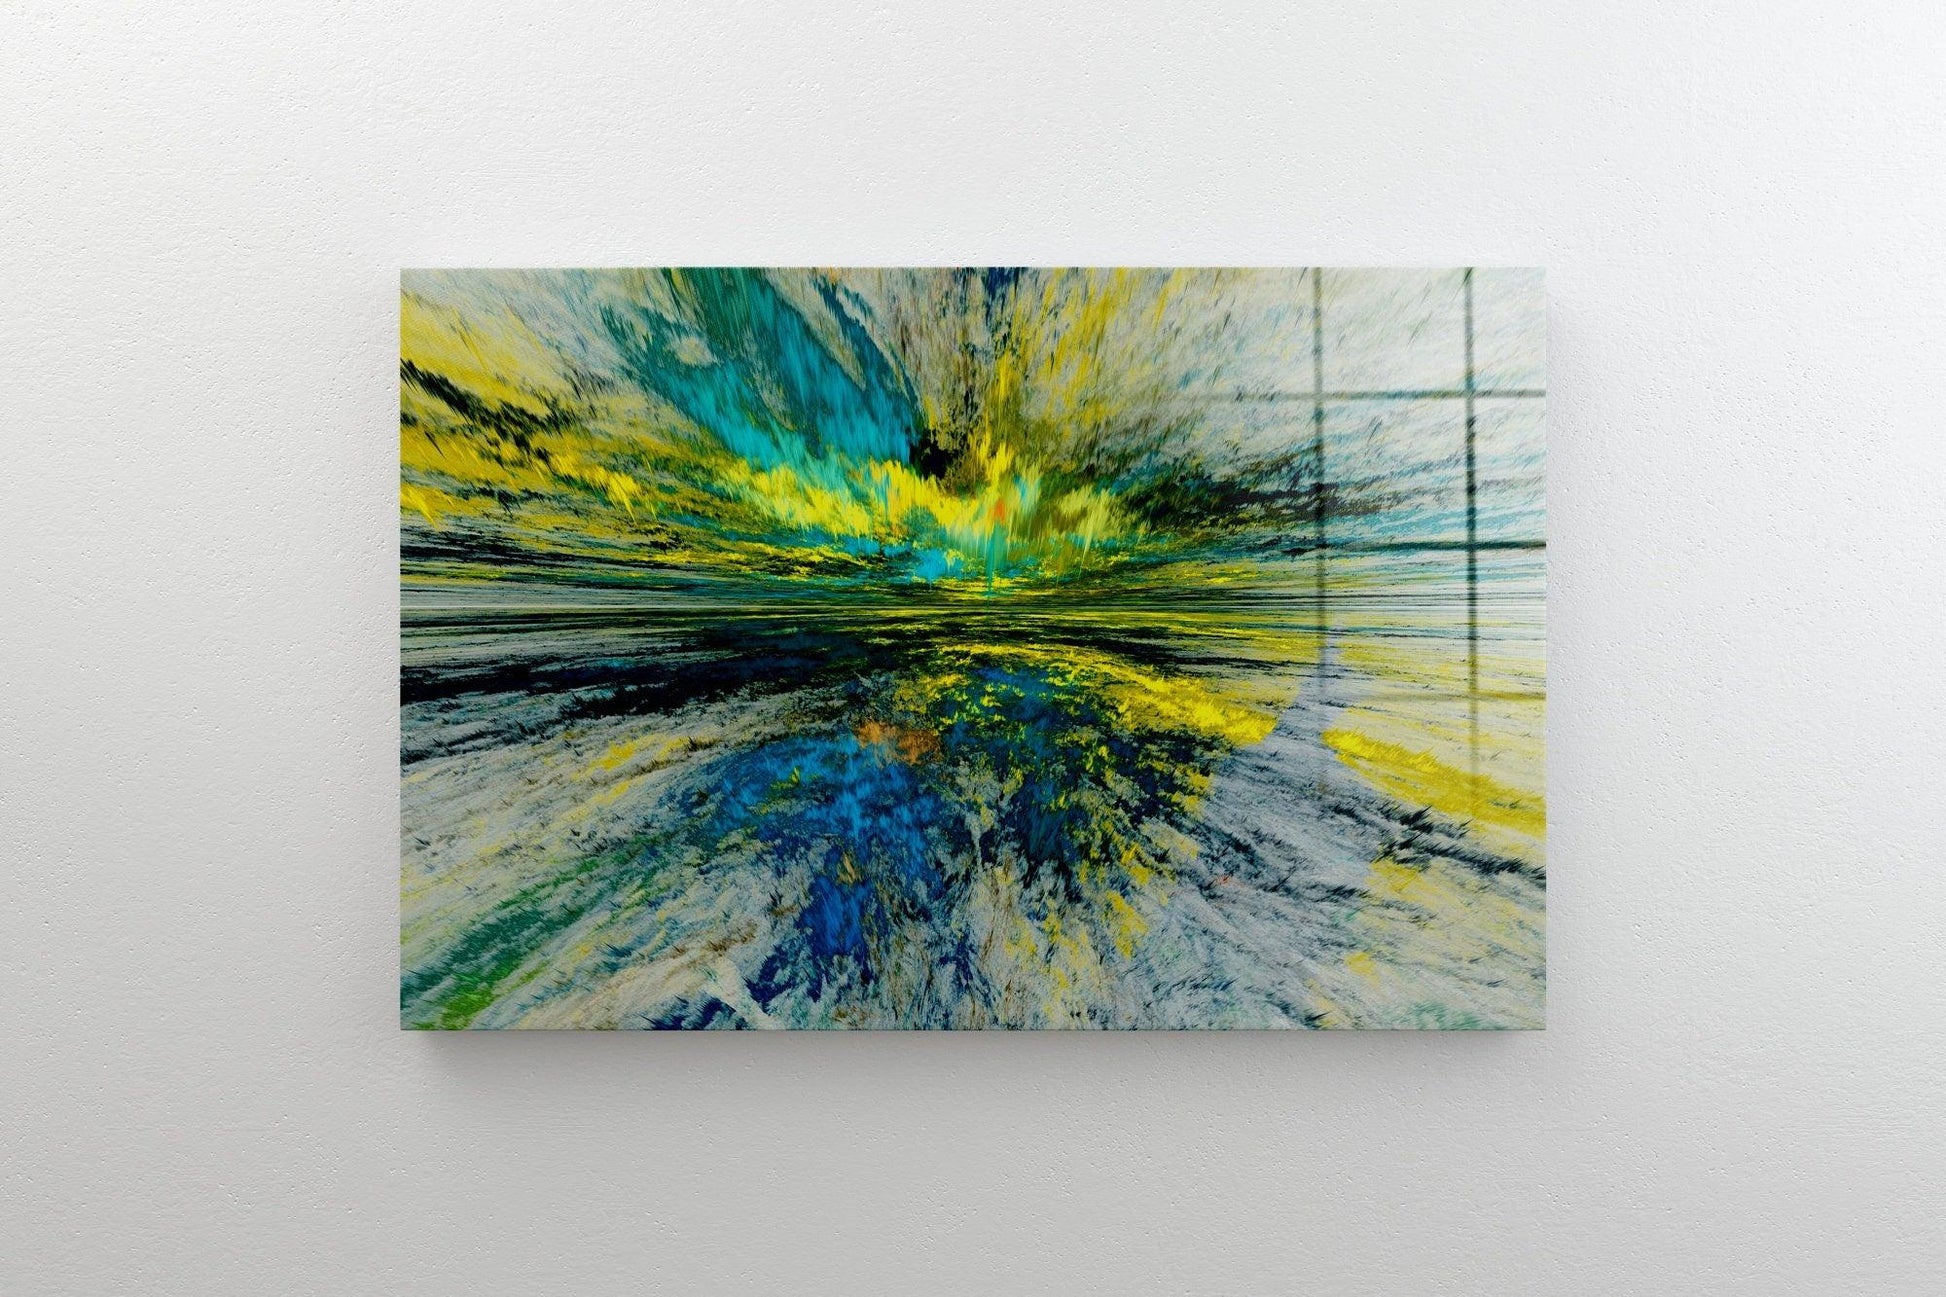 Oversized Abstract Wall Art Extra Large Modern Decor Large Original Colorful Print Texture Art Canvas Contemporary Wall Art Home Decor